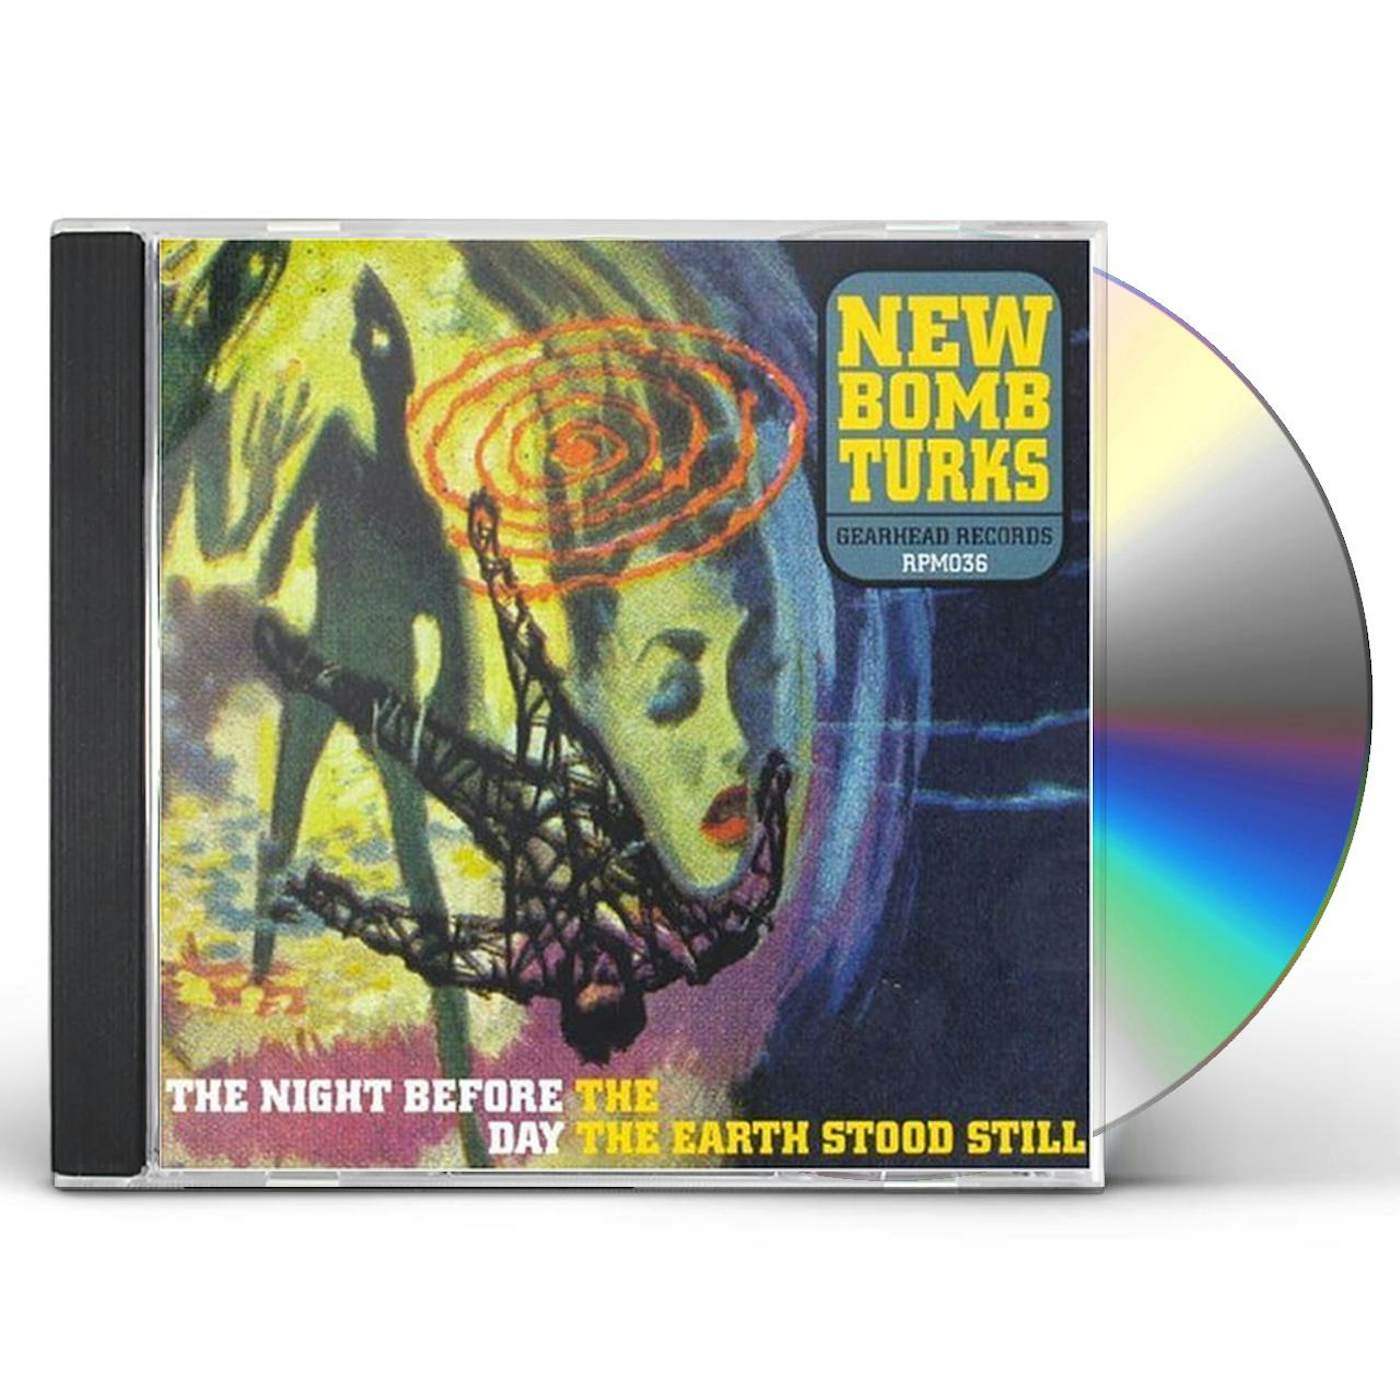 New Bomb Turks NIGHT BEFORE THE DAY THE EARTH STOOD STILL CD